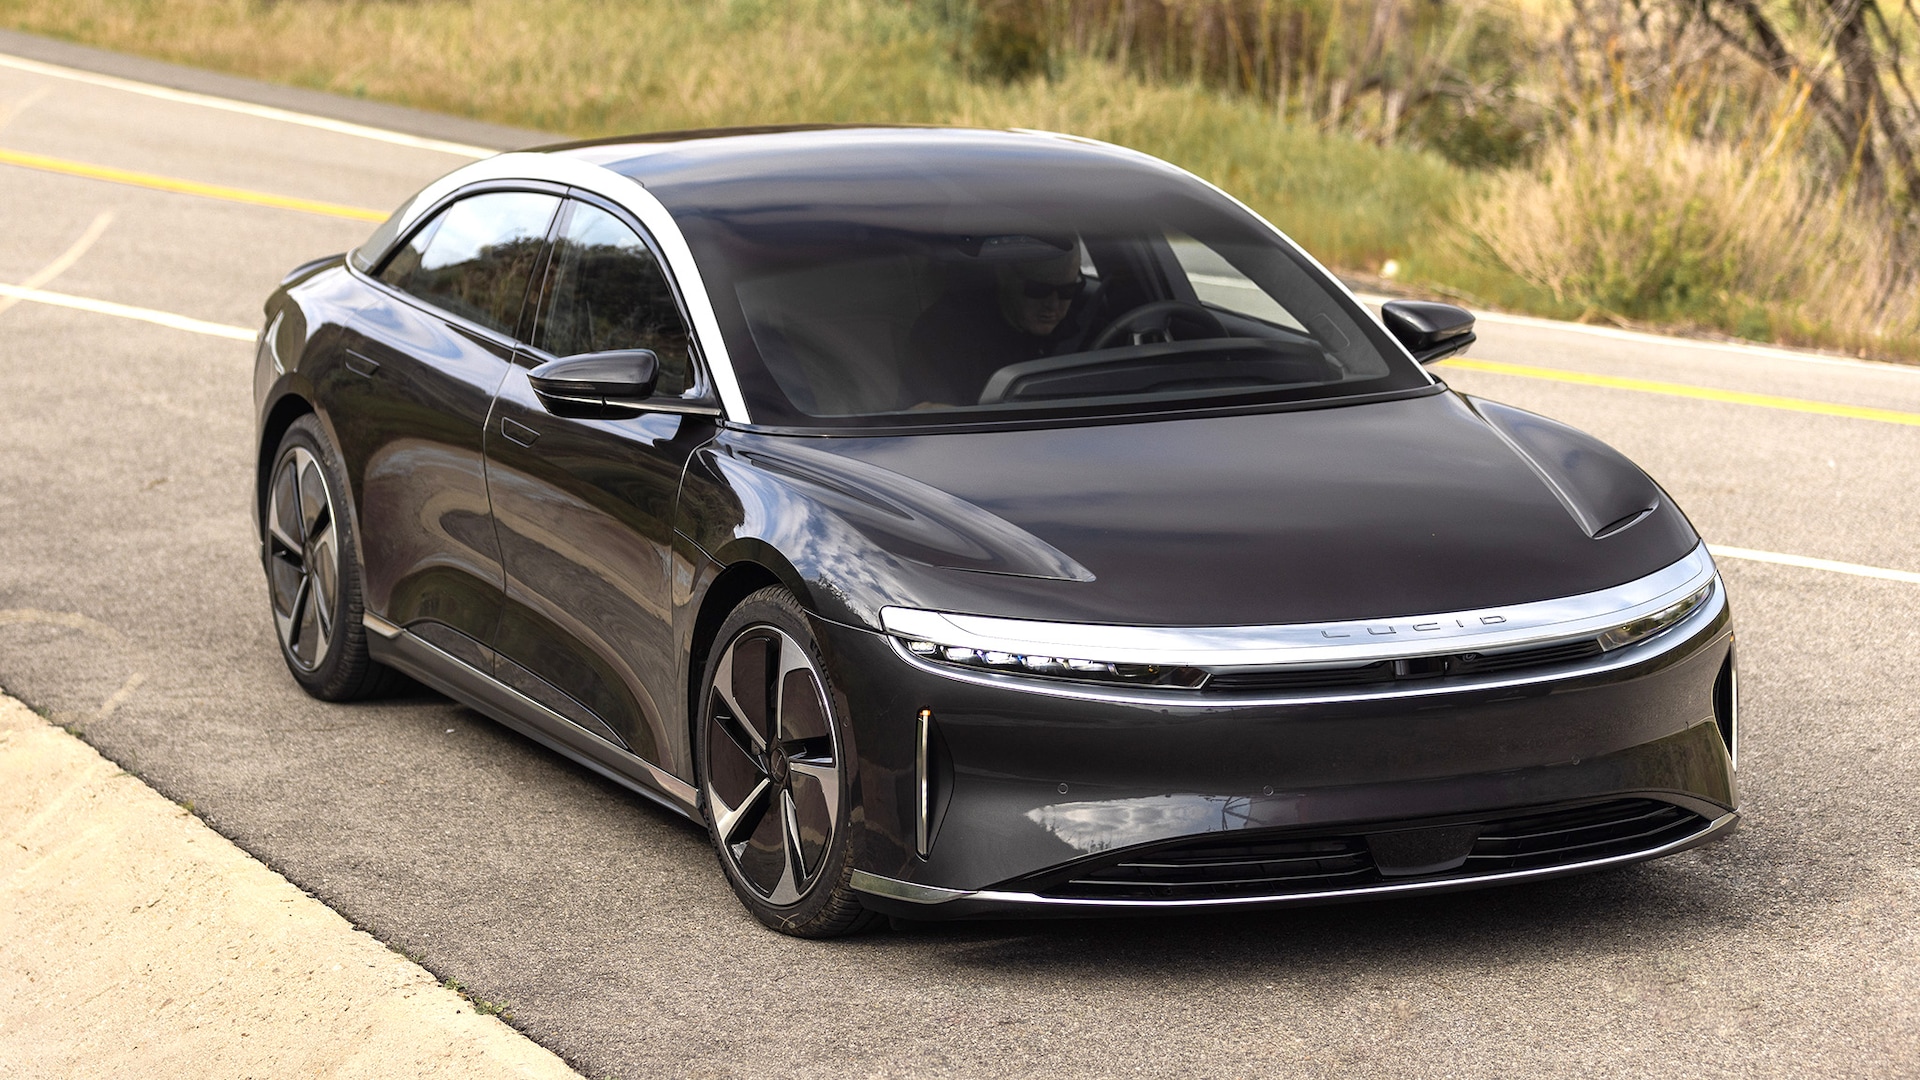 2023 Lucid Air Prices, Reviews, and Photos - MotorTrend